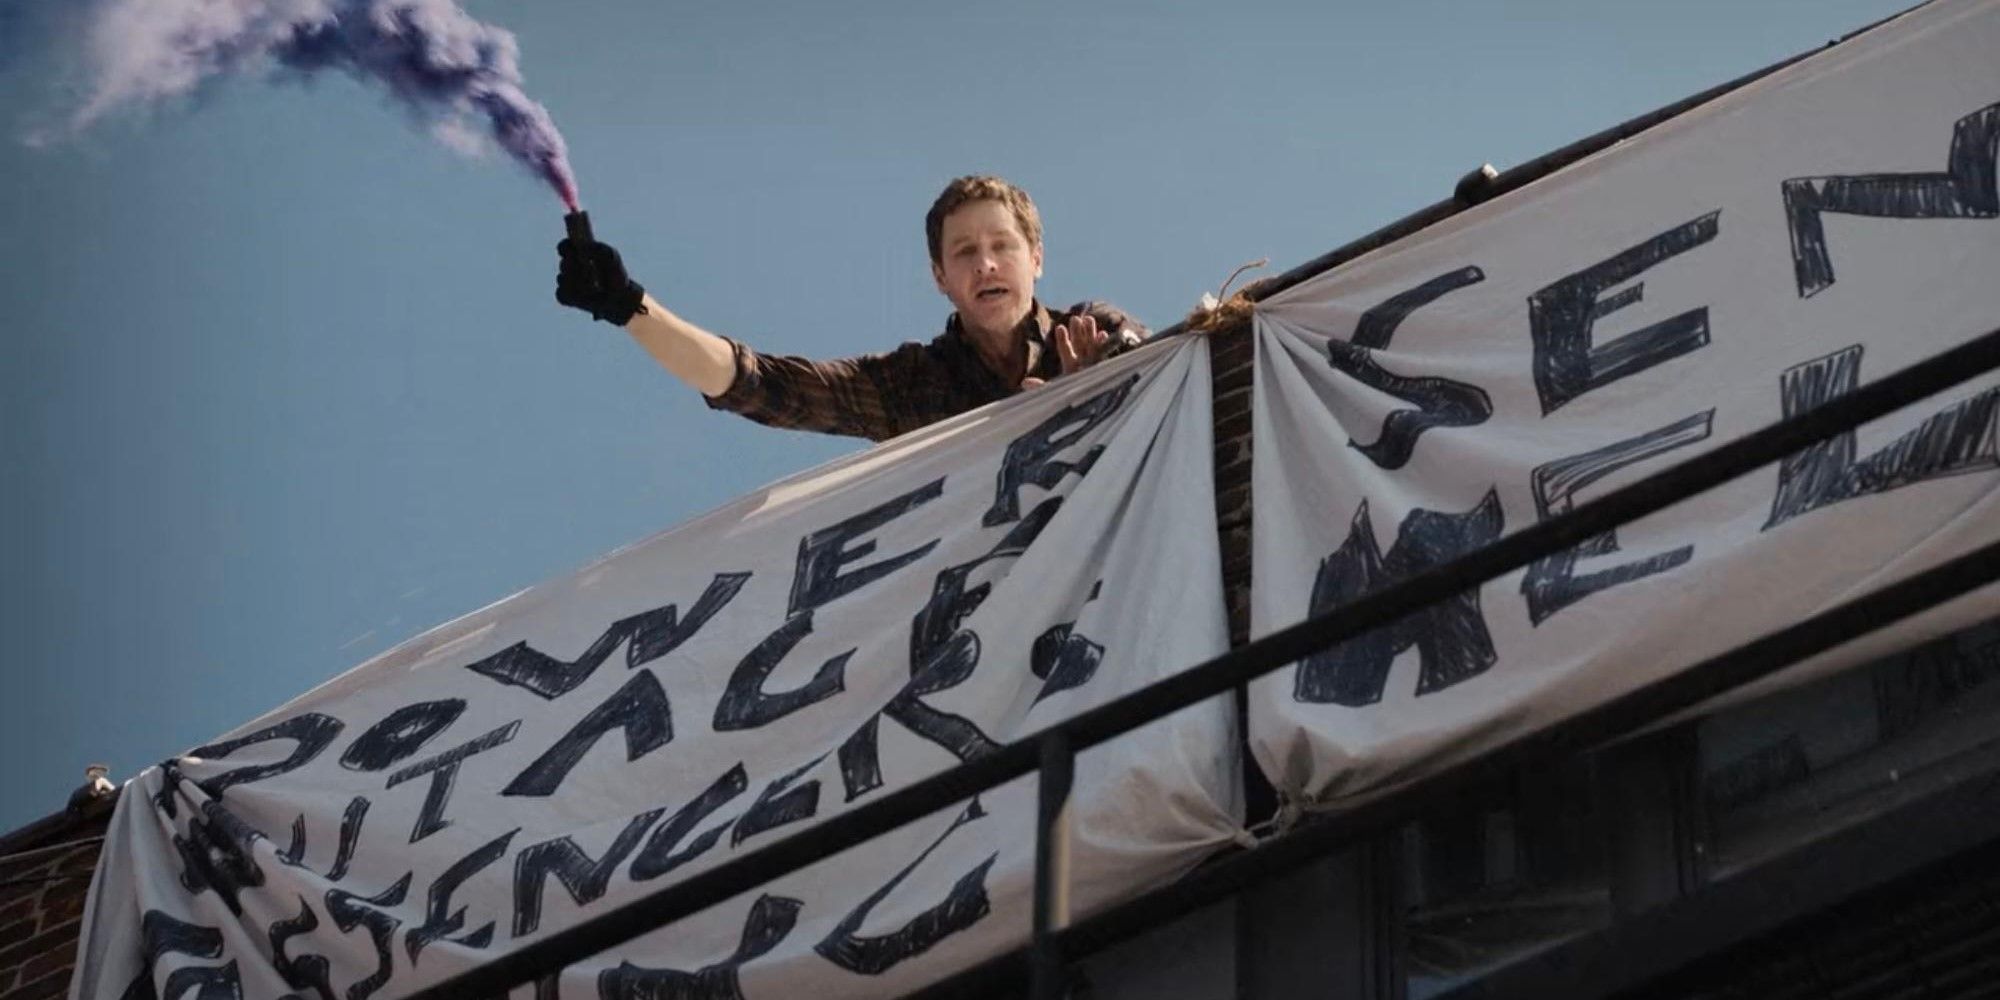 Ben holding up a smoke signal on a roof in Manifest